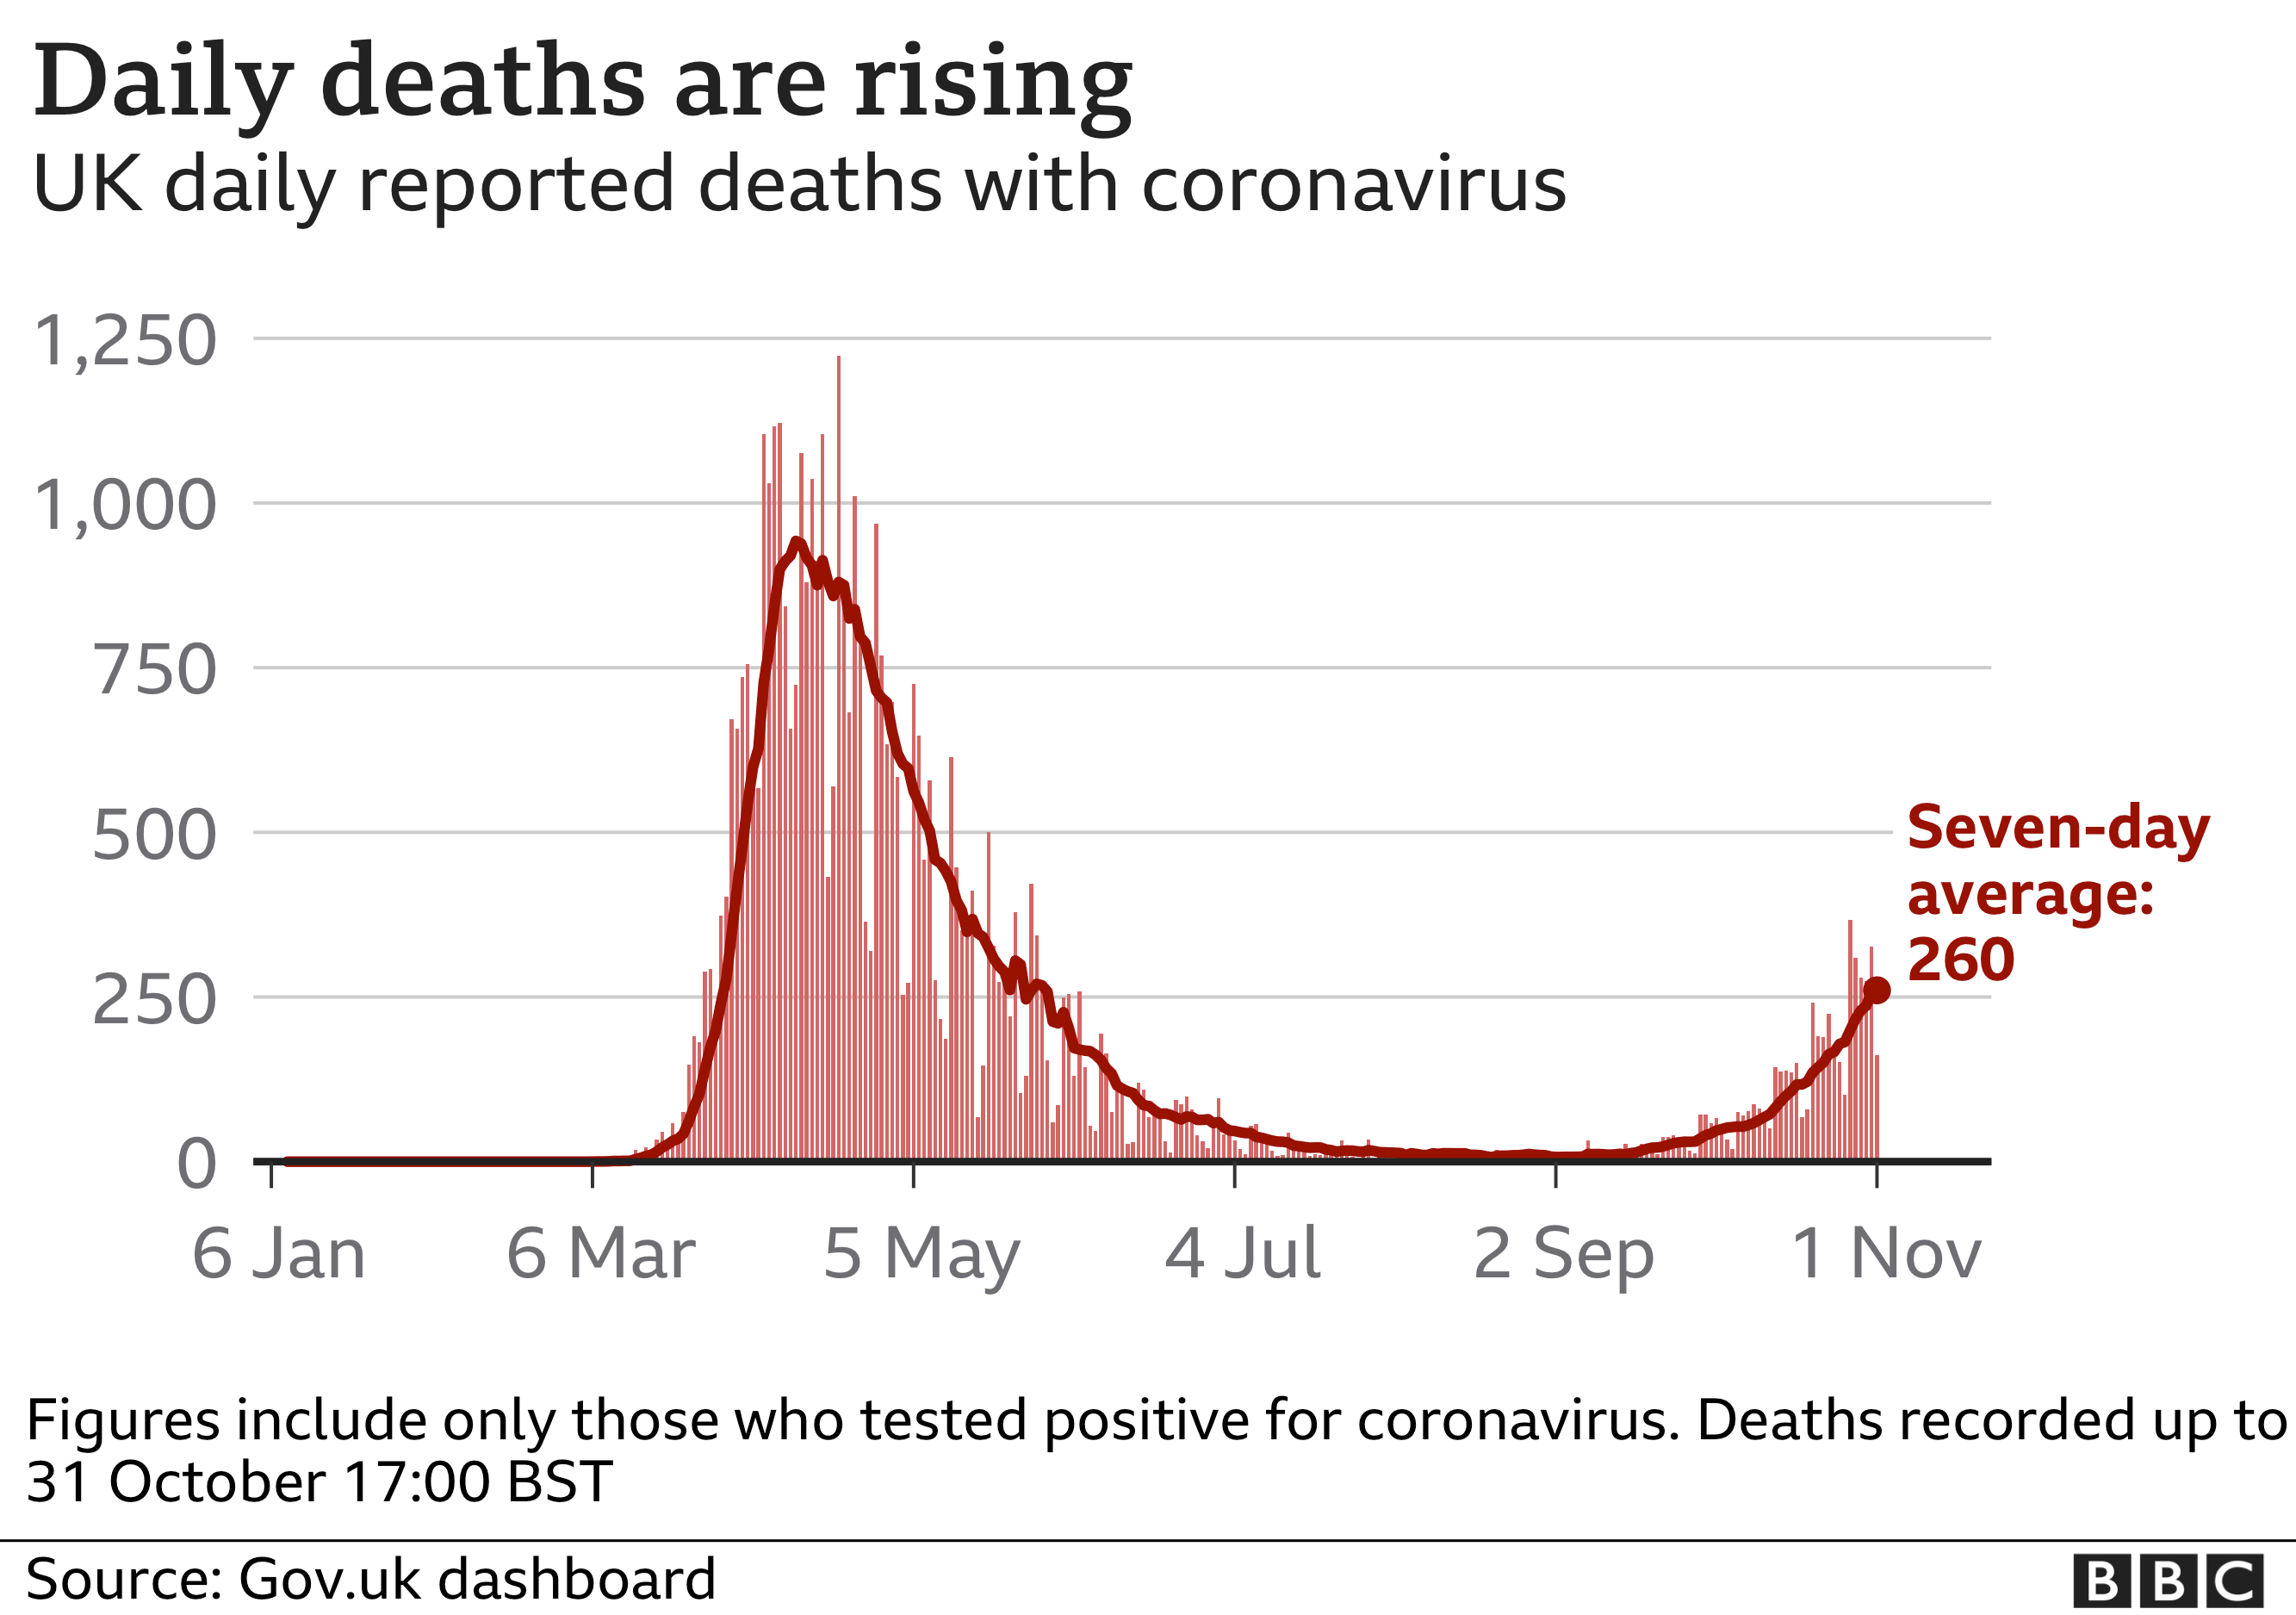 Graph showing UK daily reported deaths